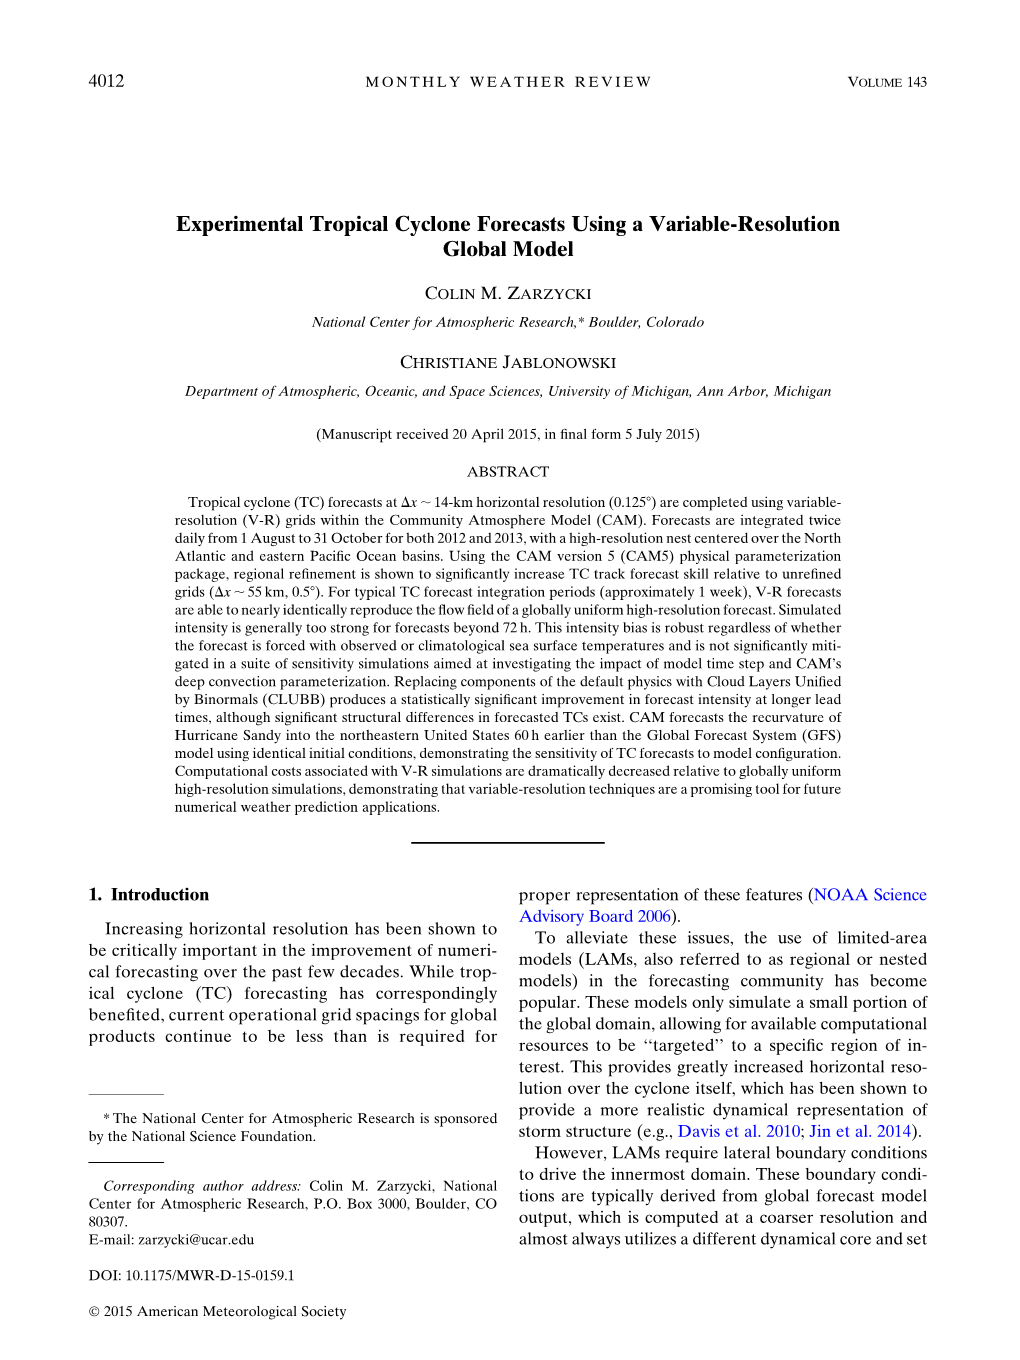 Experimental Tropical Cyclone Forecasts Using a Variable-Resolution Global Model